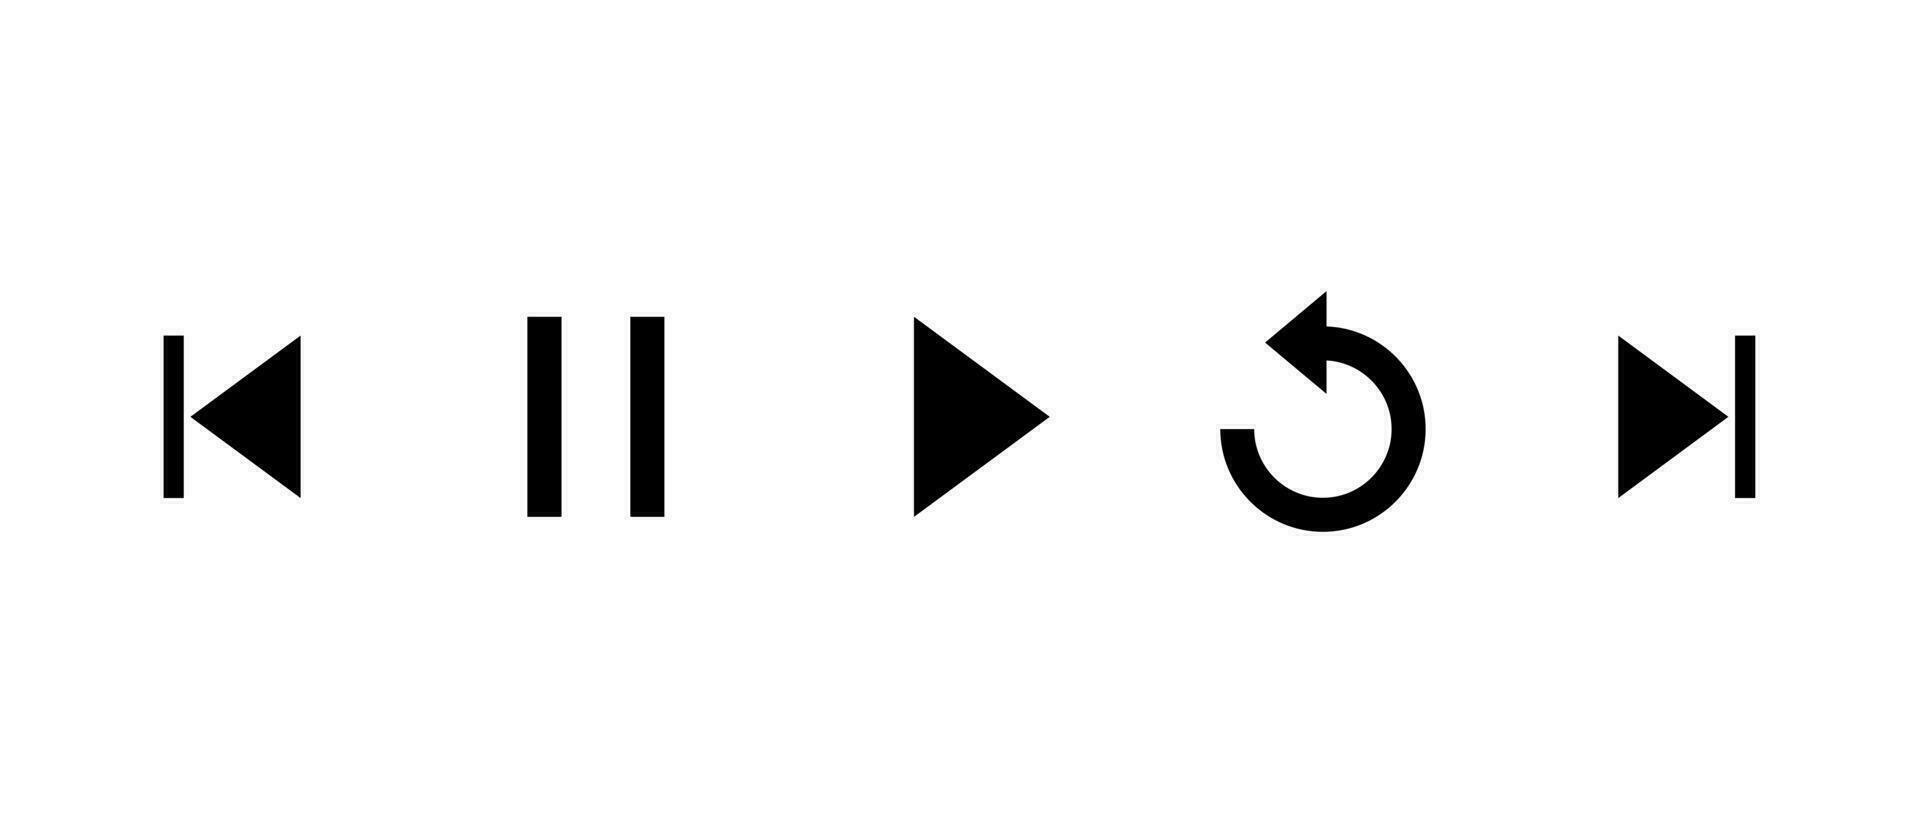 Previous, pause, play, replay, and next track icon vector. Elements for video streaming app vector